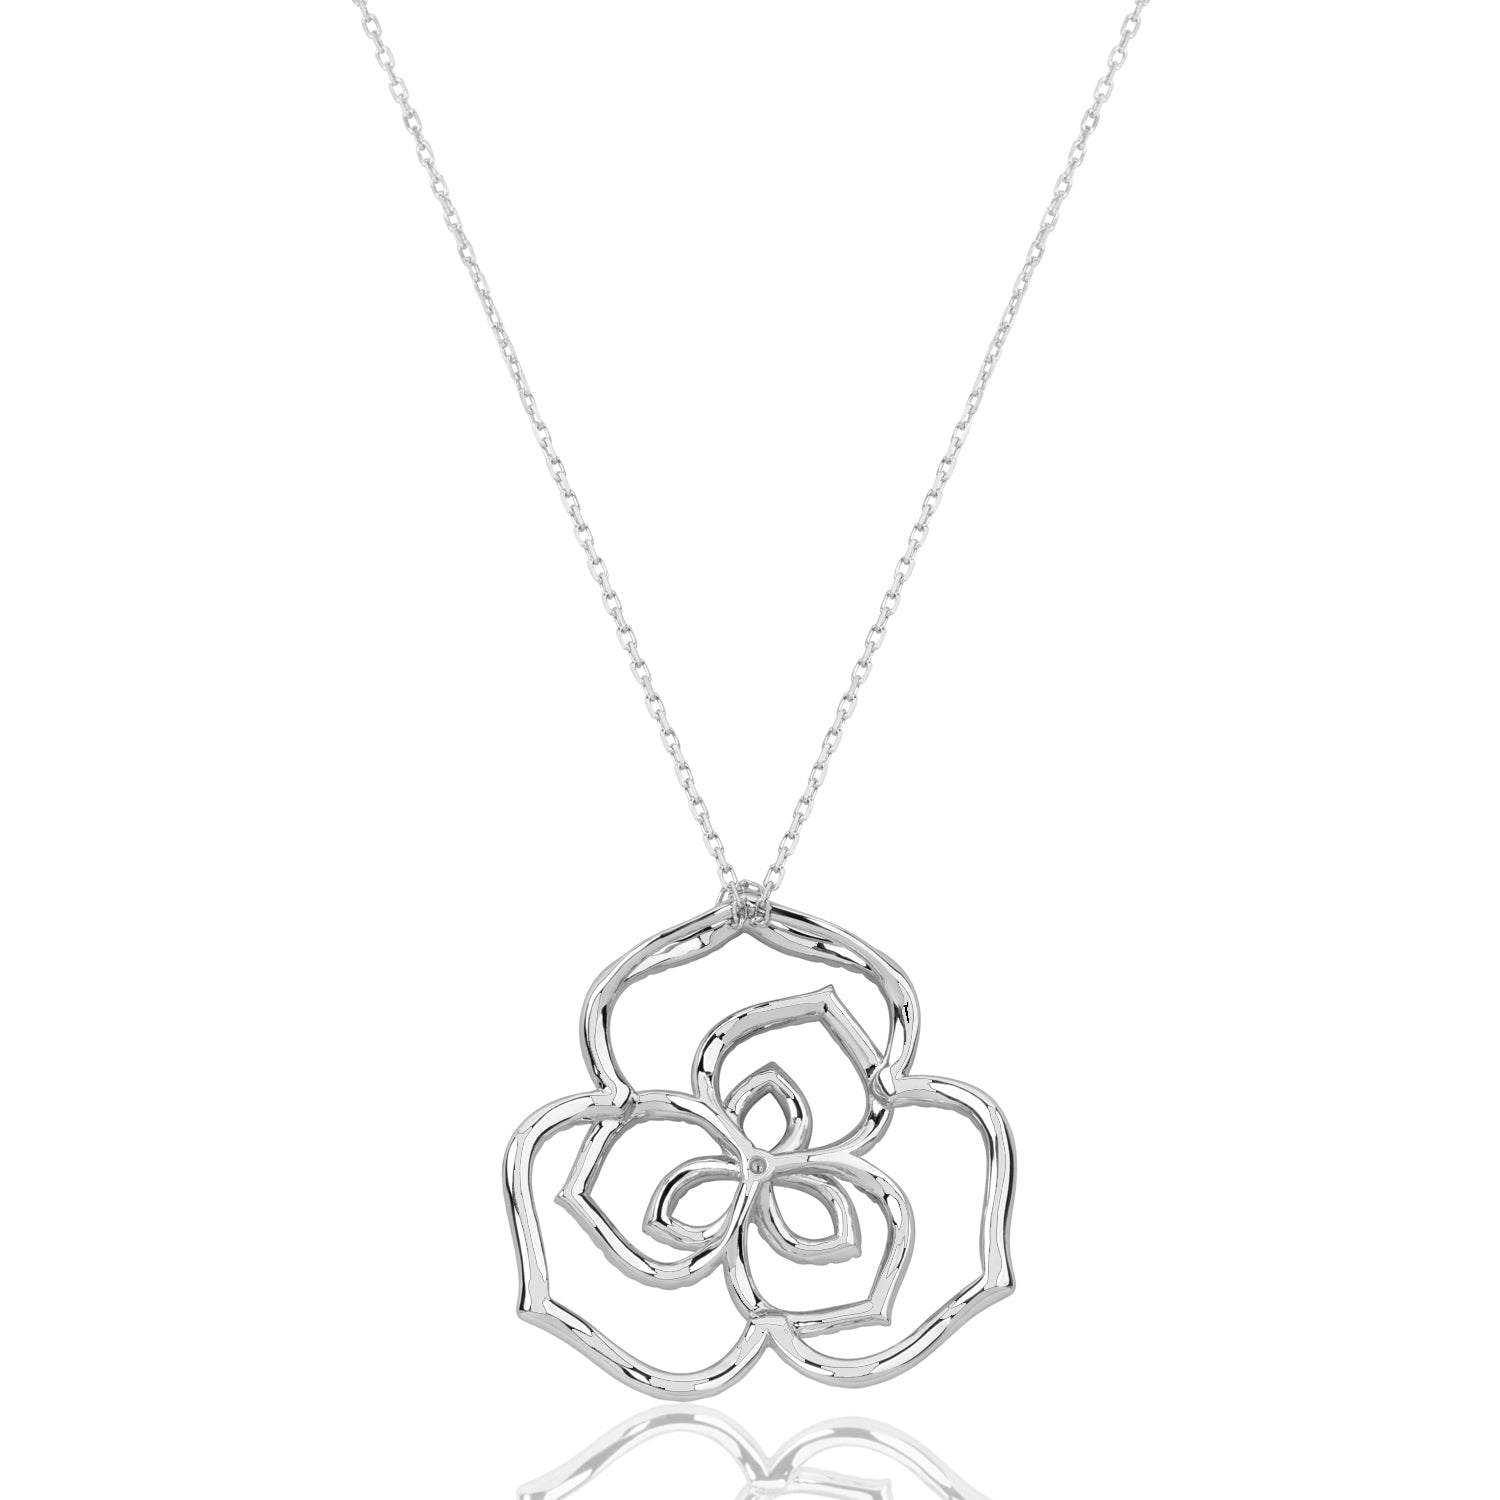 Silpada 'Blooming Flower' Sterling Silver Mother-of-Pearl Pendant Necklace,  16